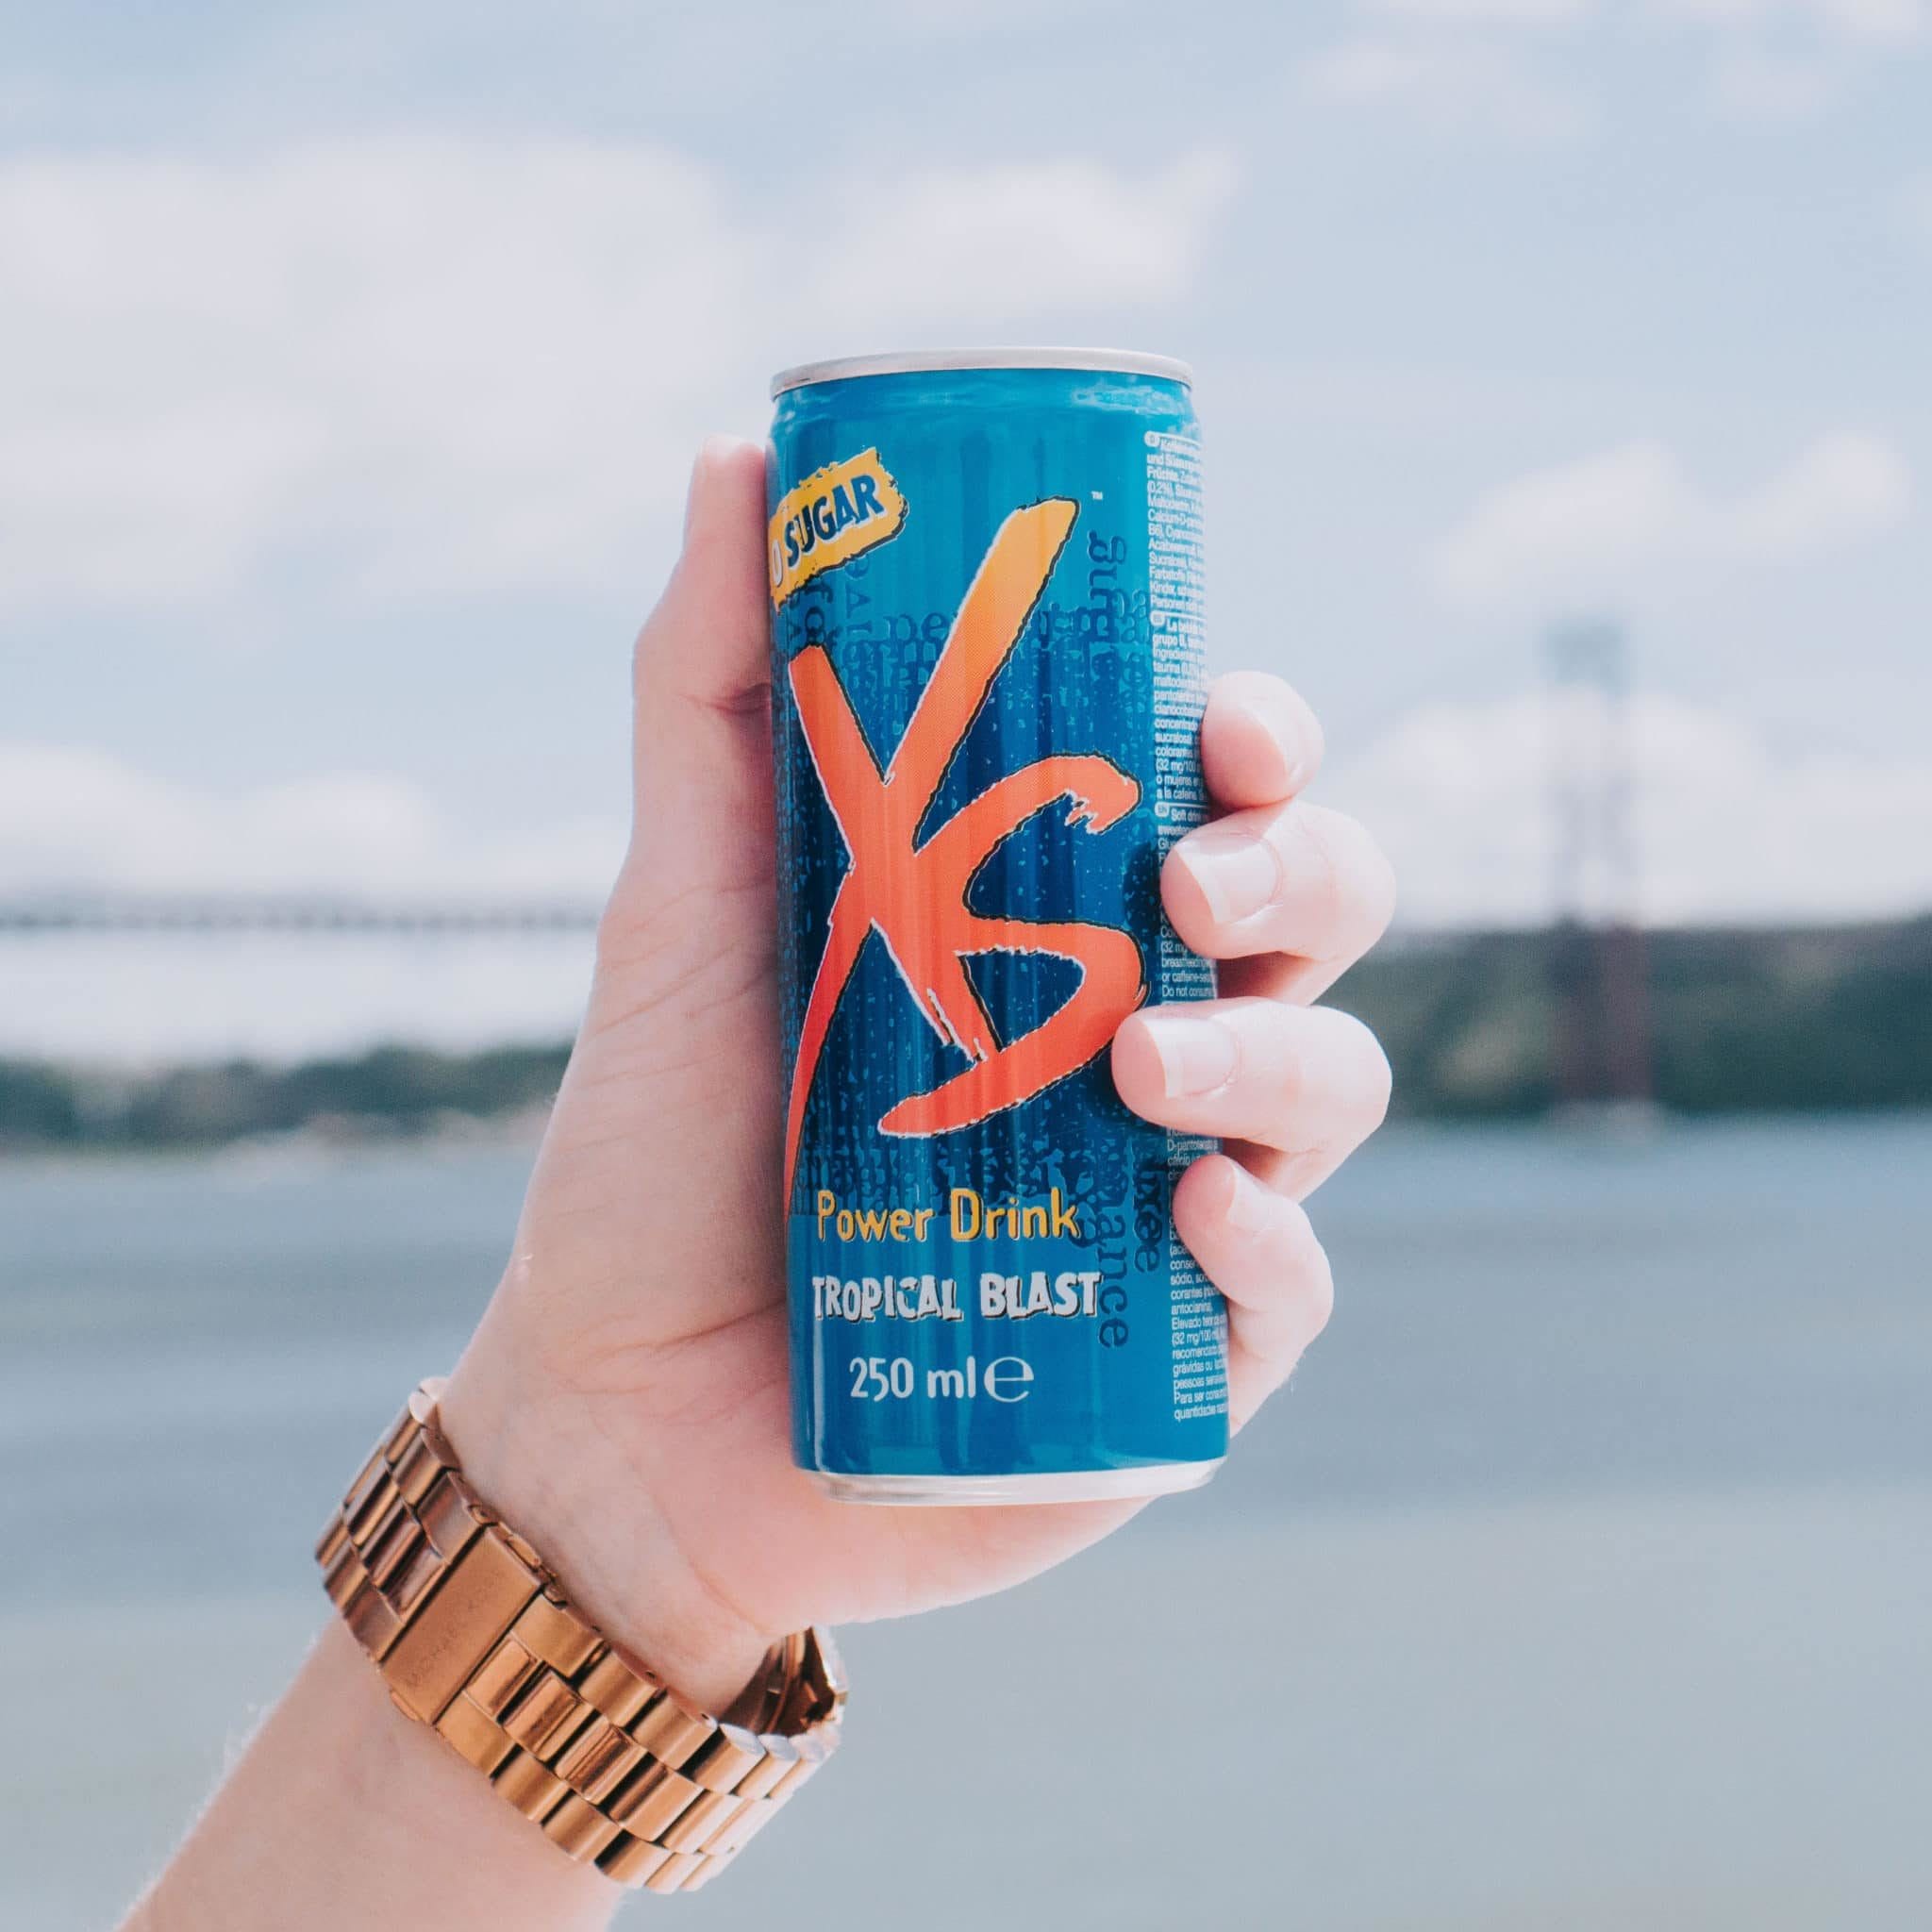 A close up of a hand holding an XS Power Drink with the Golden Gate Bridge in the background. Quench your thirst and improve your body's hydration with XS Energy drinks.